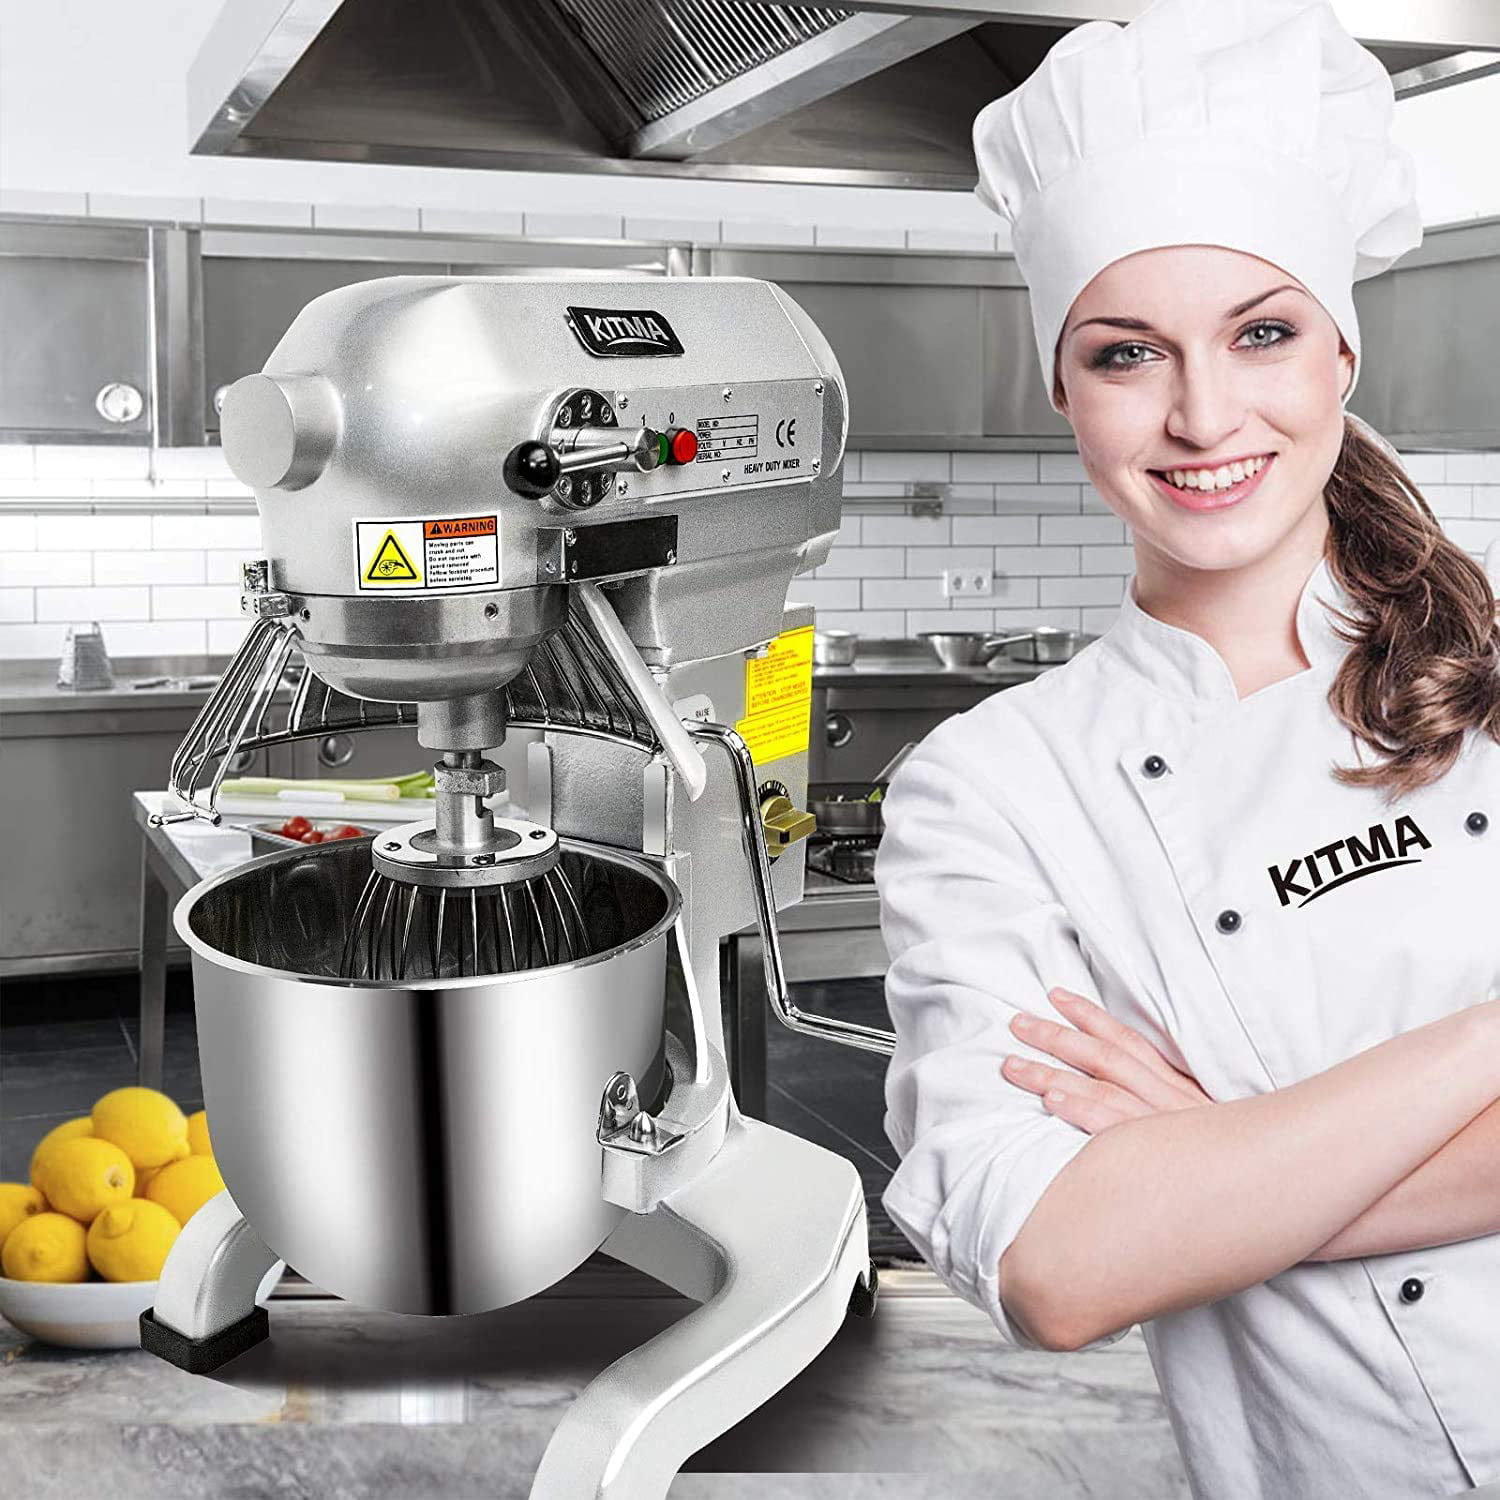 FREE SHIPPING - 2000W Professional Kitchen Food Stand Mixer 10L Large –  Doctor Quesero